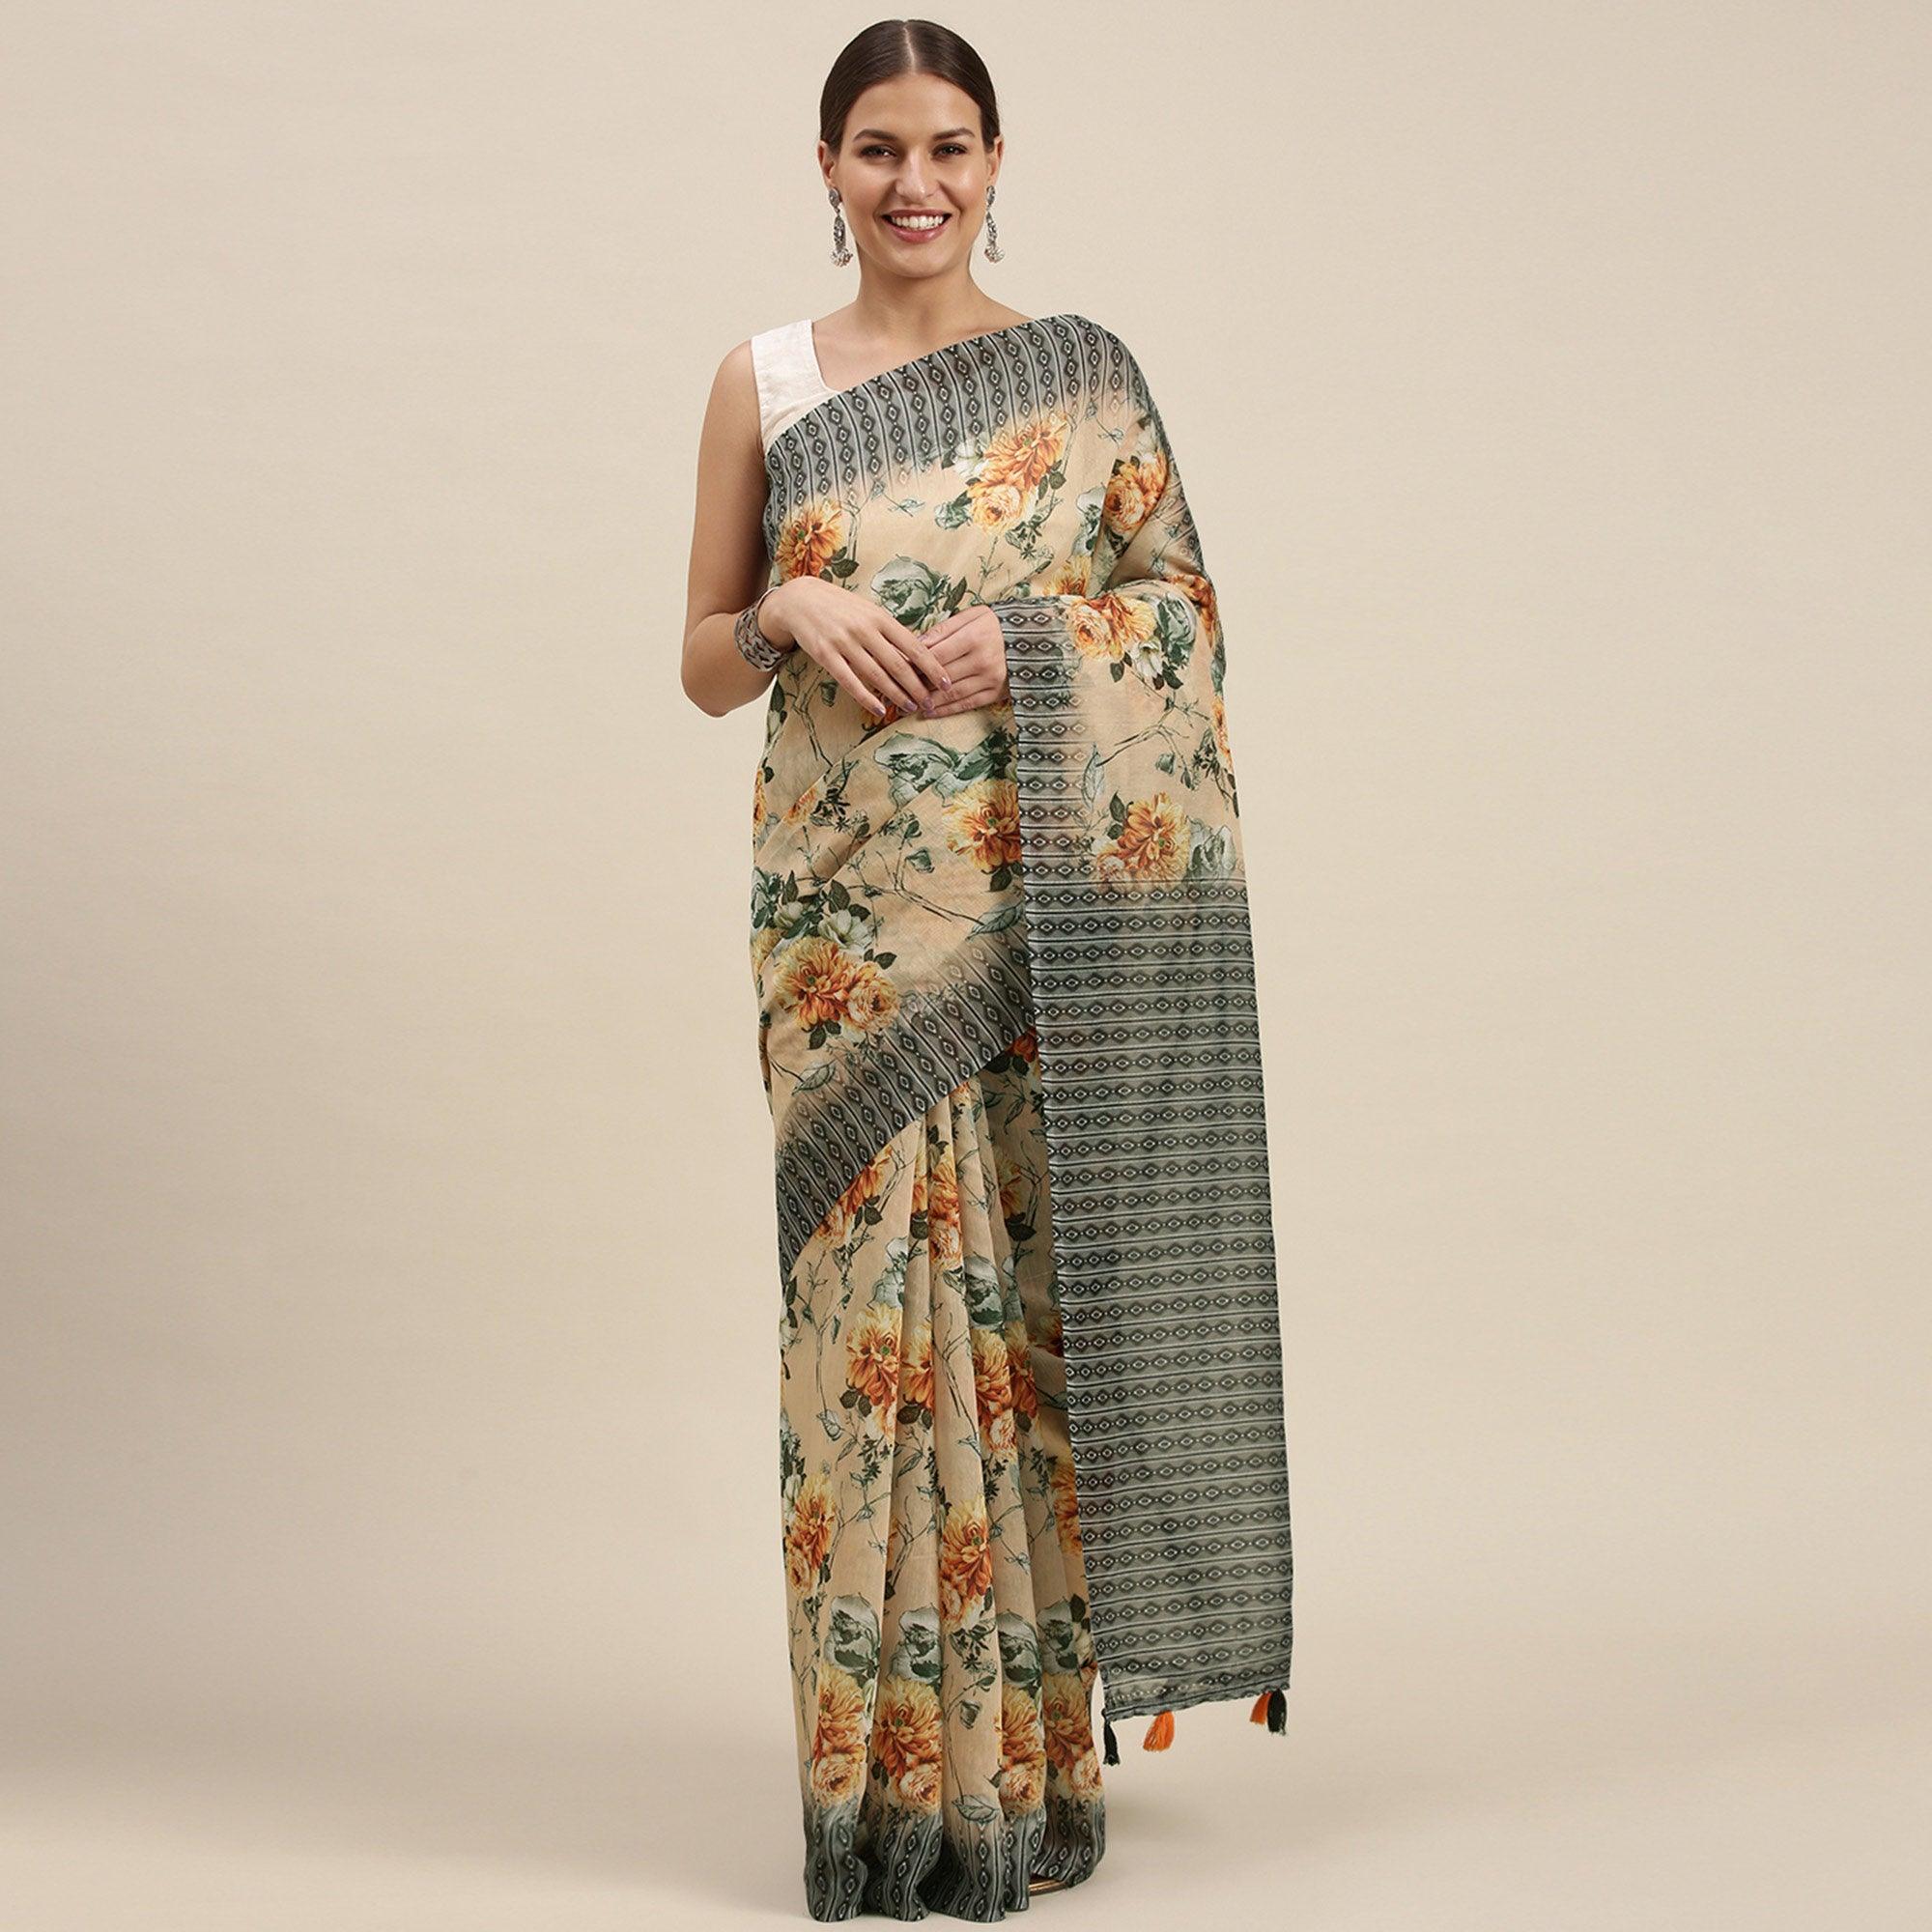 Peach Casual Wear Floral Printed Cotton Blend Saree With Tassels - Peachmode